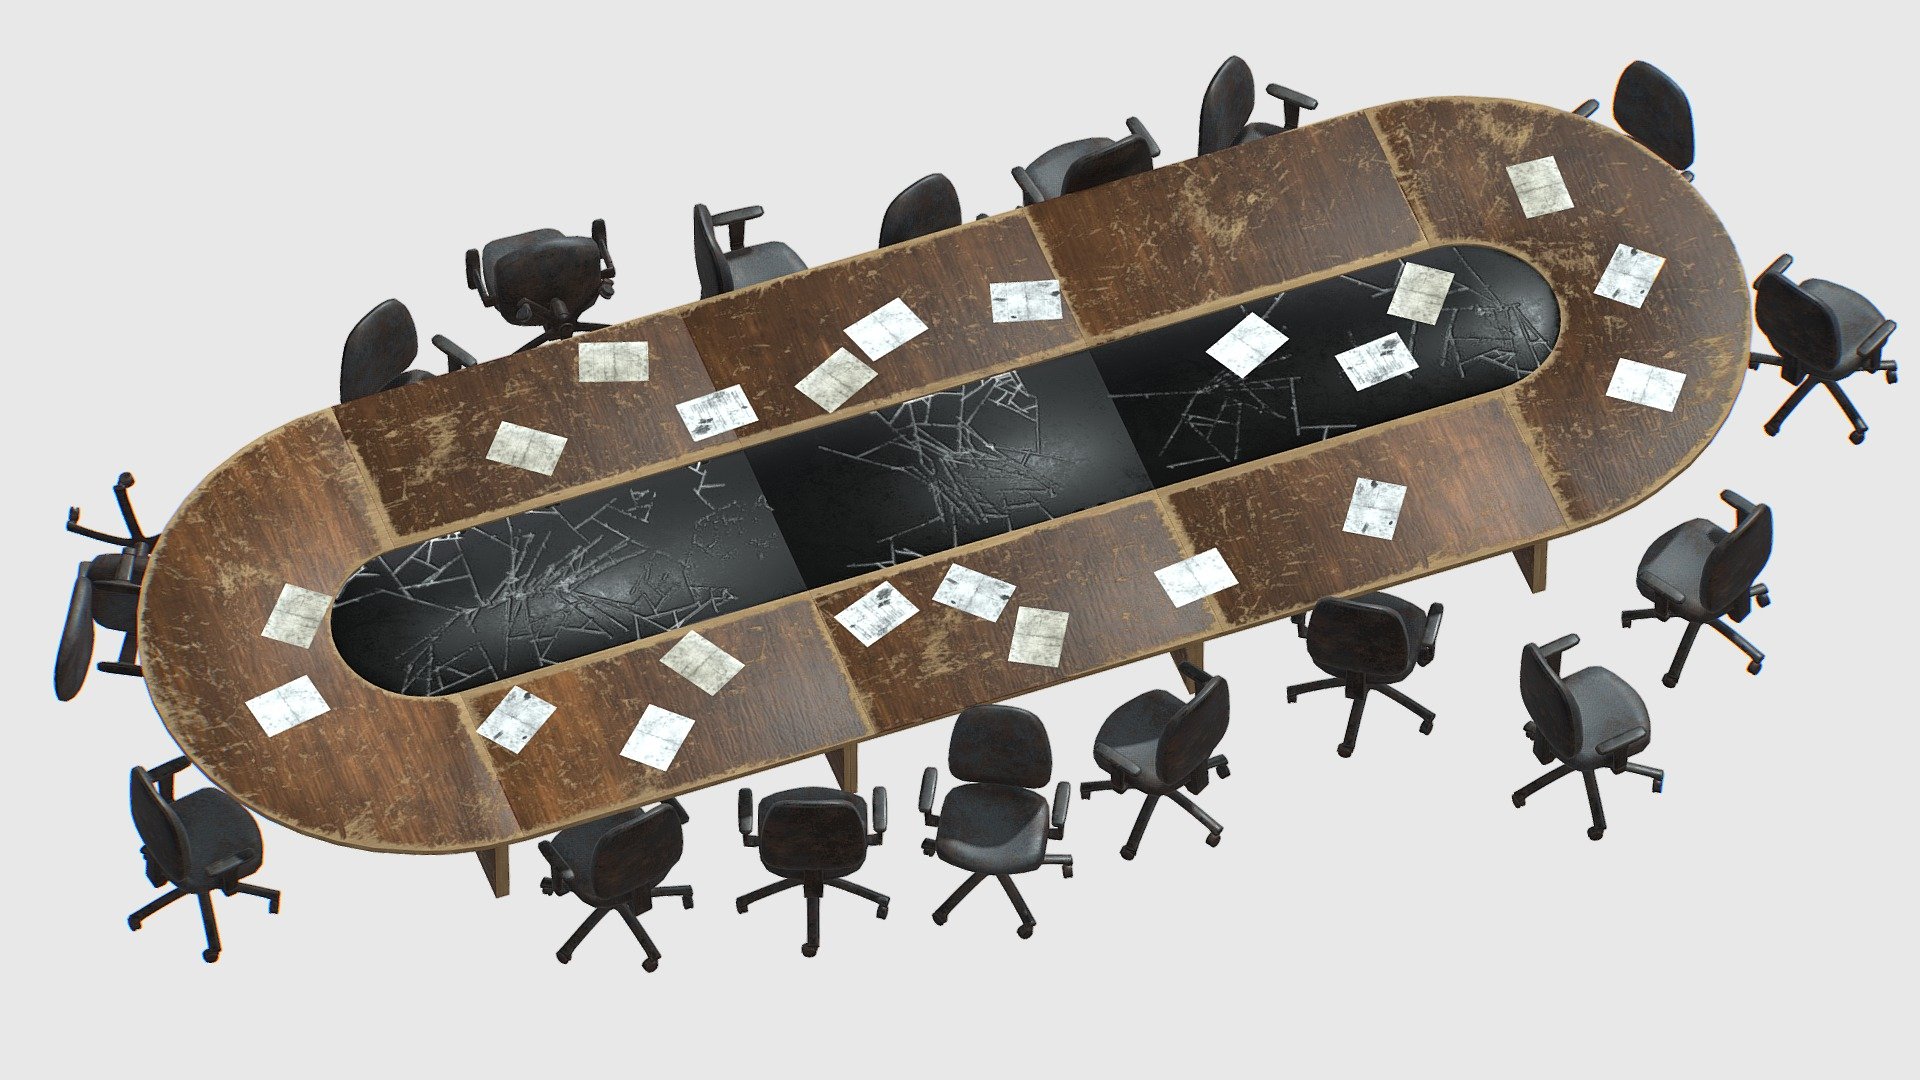 Meeting Table Damaged is a high quality, photo real model that will enhance detail and realism to any of your rendering projects. The model has a fully textured, detailed design that allows for close-up renders, and was originally modeled in cinema 4d

The model contains 104 405 polygons .

|| TEXTURES ||

PBR Textures :Base color / Normal / Roughness / OA .

Dim :

Meeting Table : 2048 x 2048 / Chair : 1024 x 1024 / Paper : 256 x 256 . || FORMAT ||

CINEMA4D R17 .
FBX-3Ds-OBJ.-TBSCENE . 
Model is built to real-world scale . Units used: Centimeters. No third-party plug-ins needed. 

|| ADDITIONAL NOTES ||
Please rate it if you like it.Thank you for visite 3d model